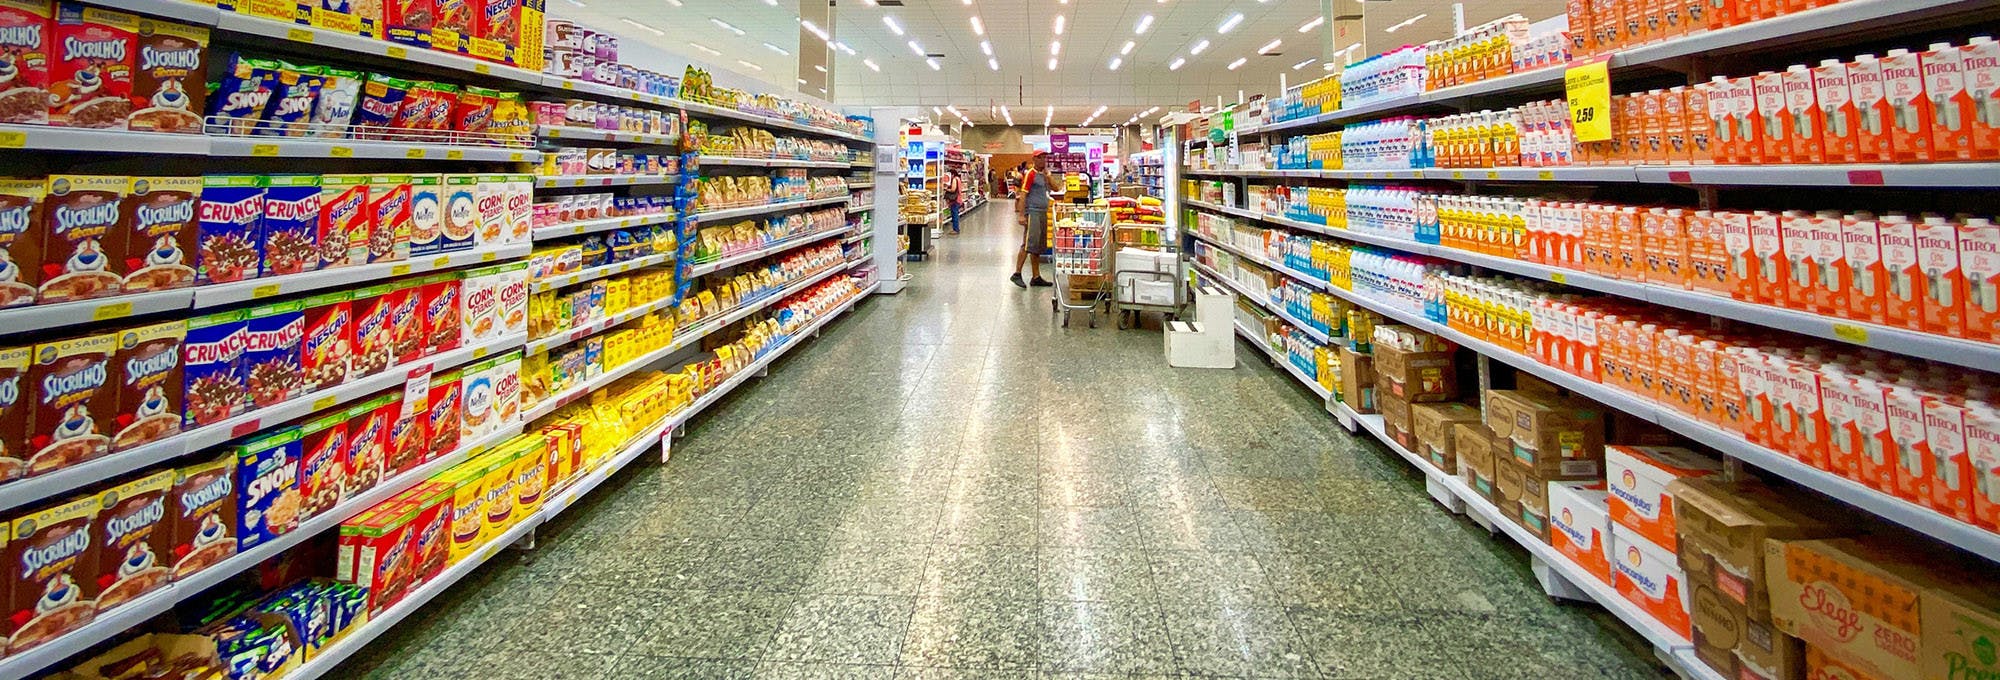 View looking down a grocery aisle